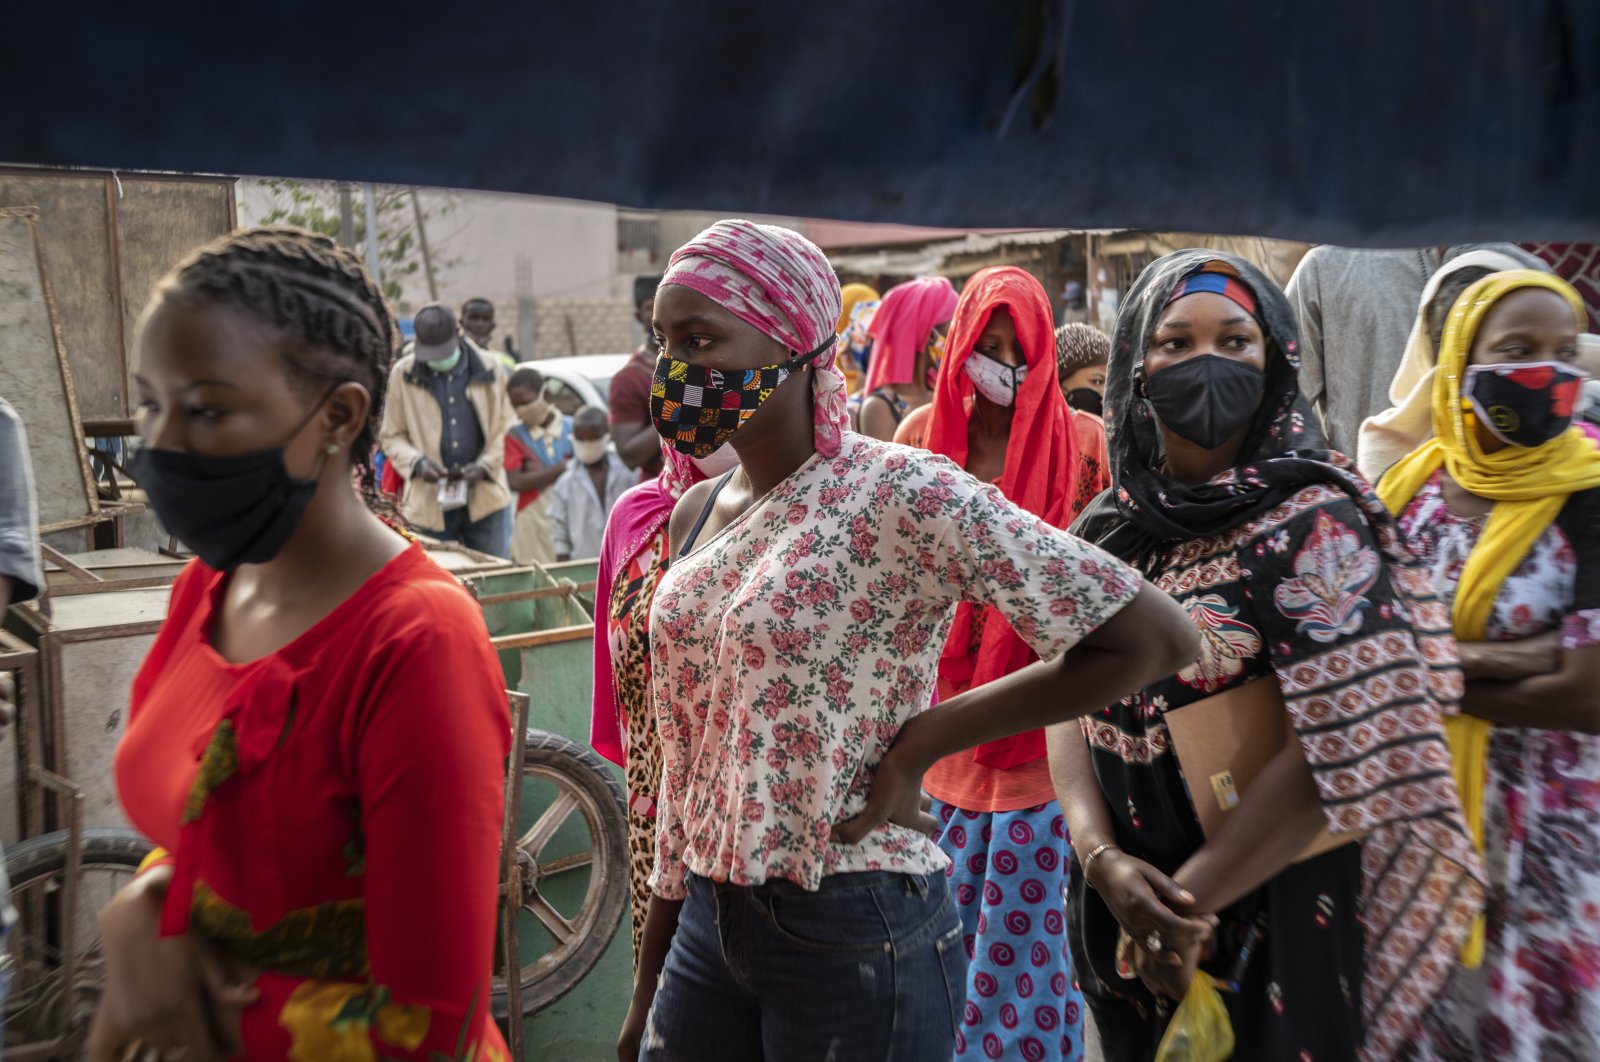 Women wear face masks as they queue to buy bread on the first day of the Muslim fasting month of Ramadan, in Dakar, Senegal, April 25, 2020. (AP Photo)